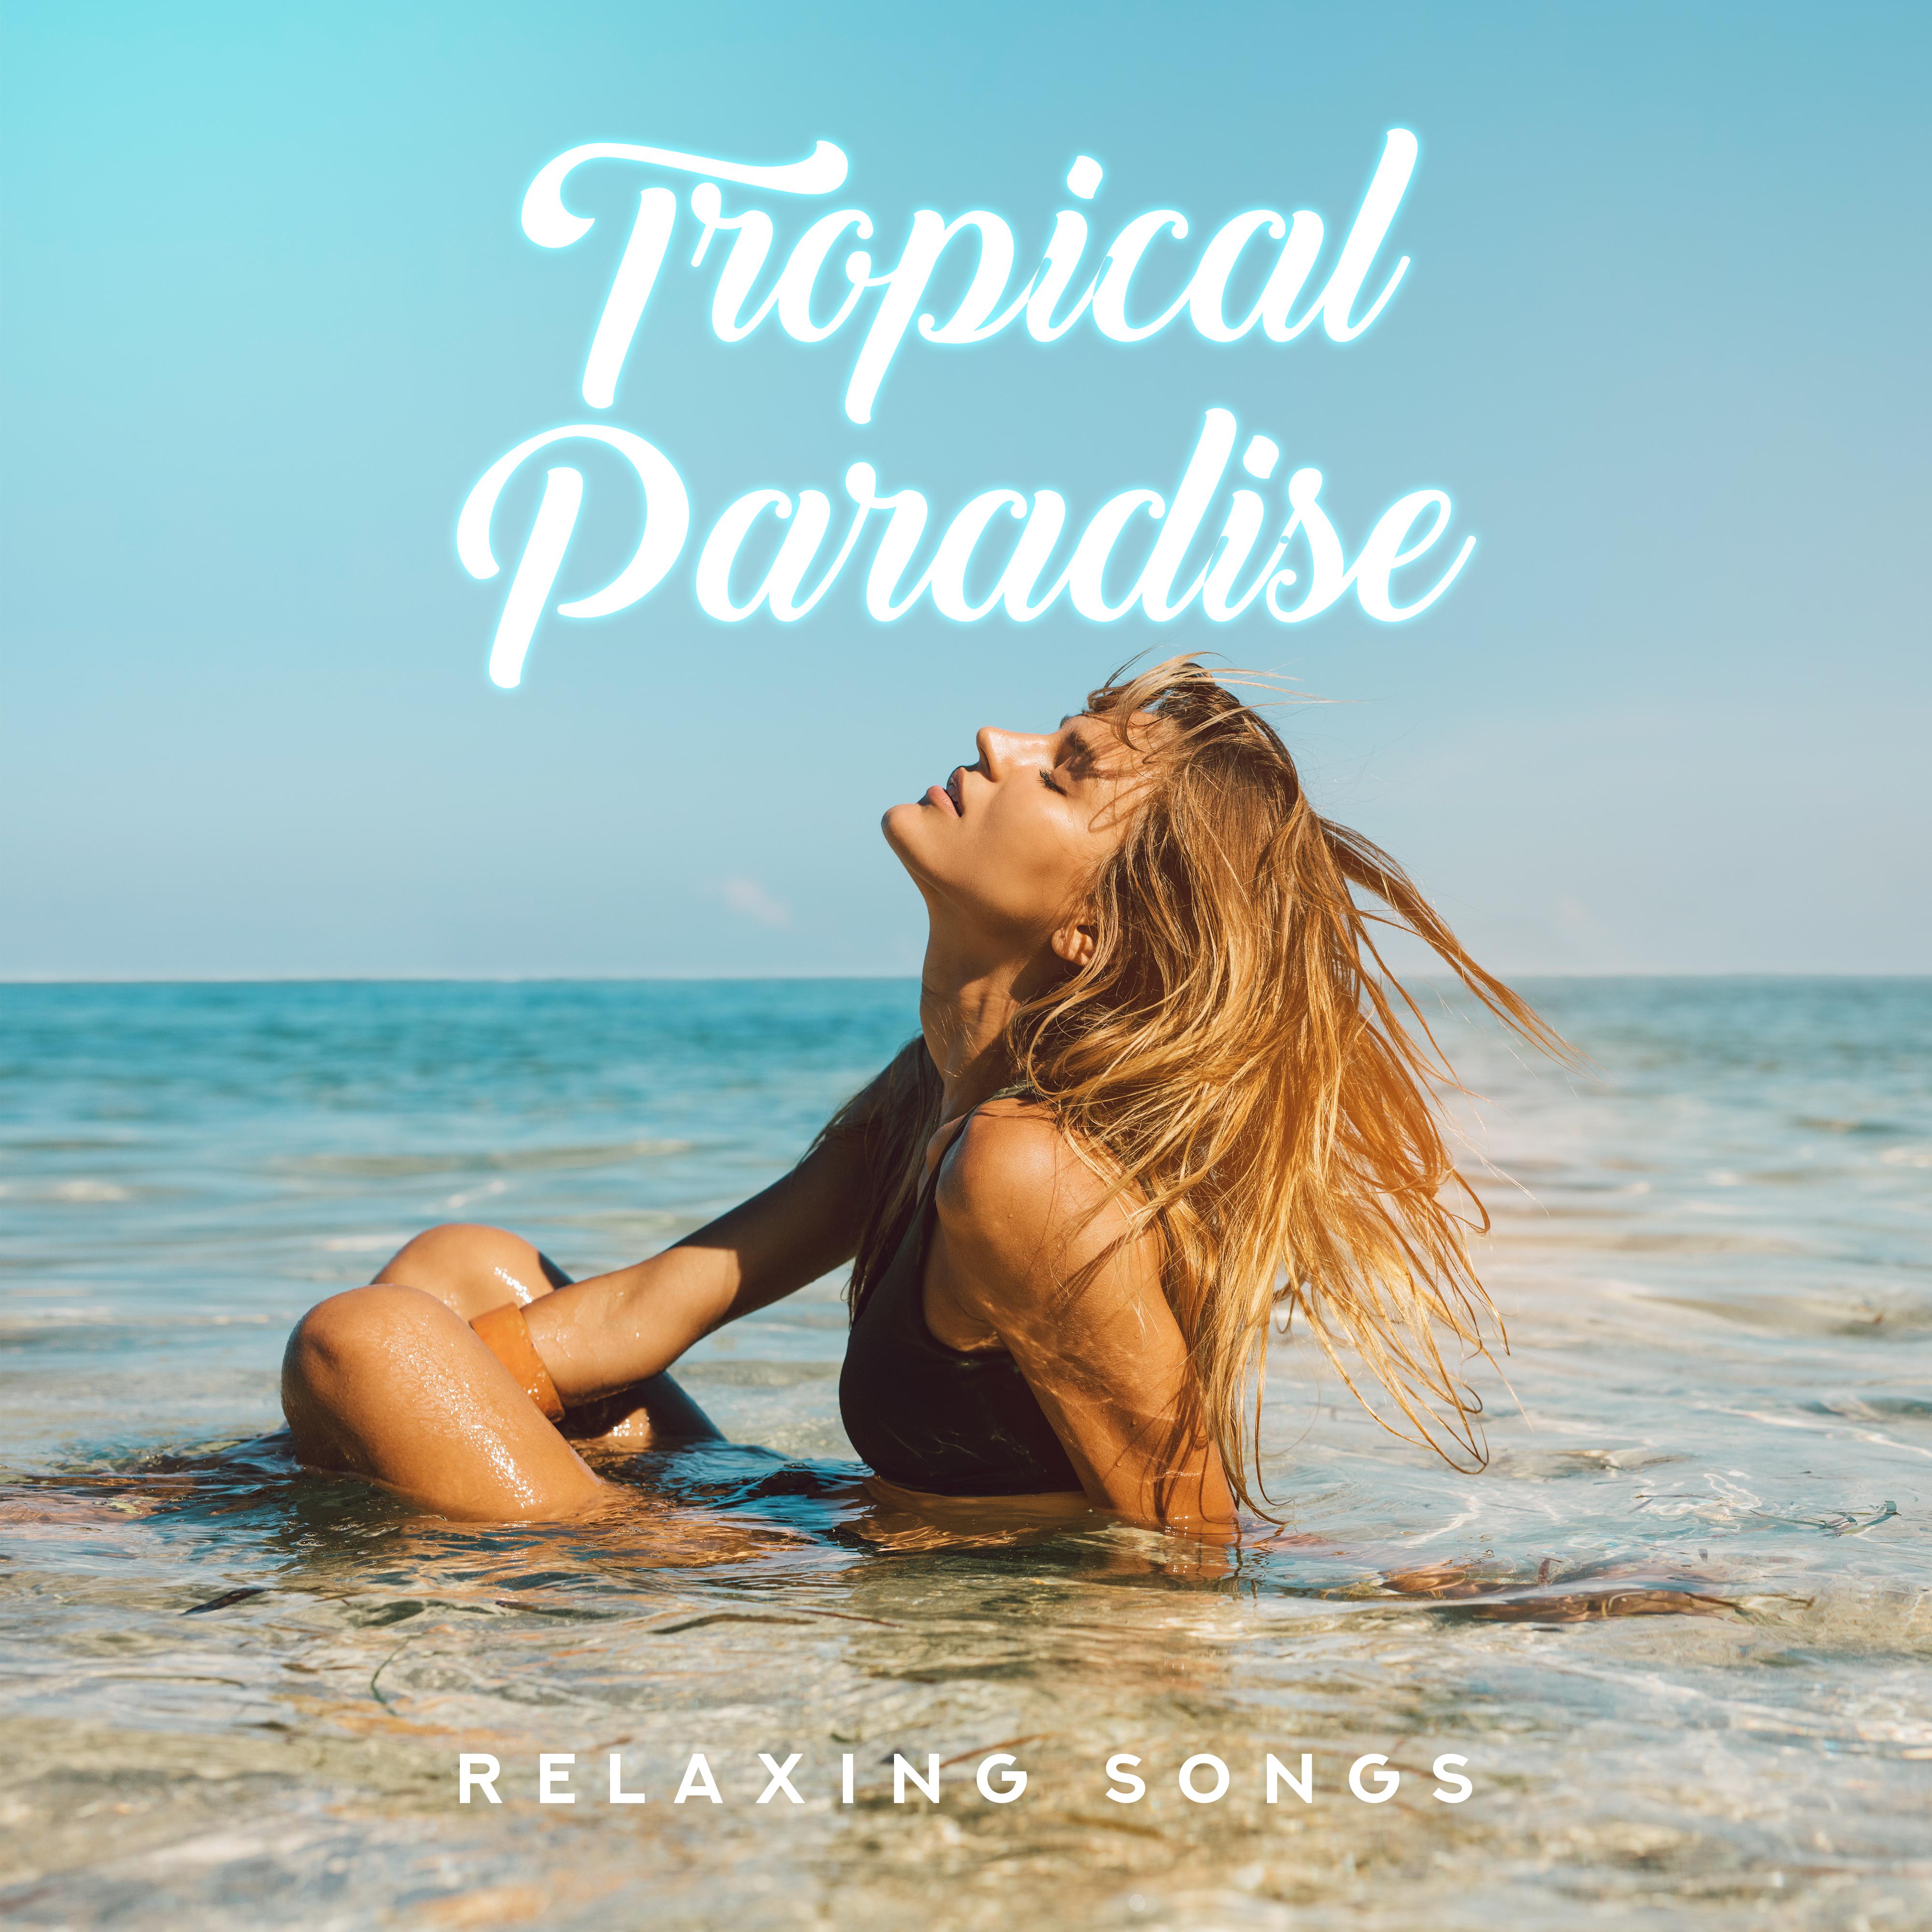 Tropical Paradise Relaxing Songs: 2019 Chillout Electronic Music Mix for Summer Relaxation, Deep & **** Beach Vibes, Songs Perfect for Summer Holiday Lazing & Drinking Cold Cocktails